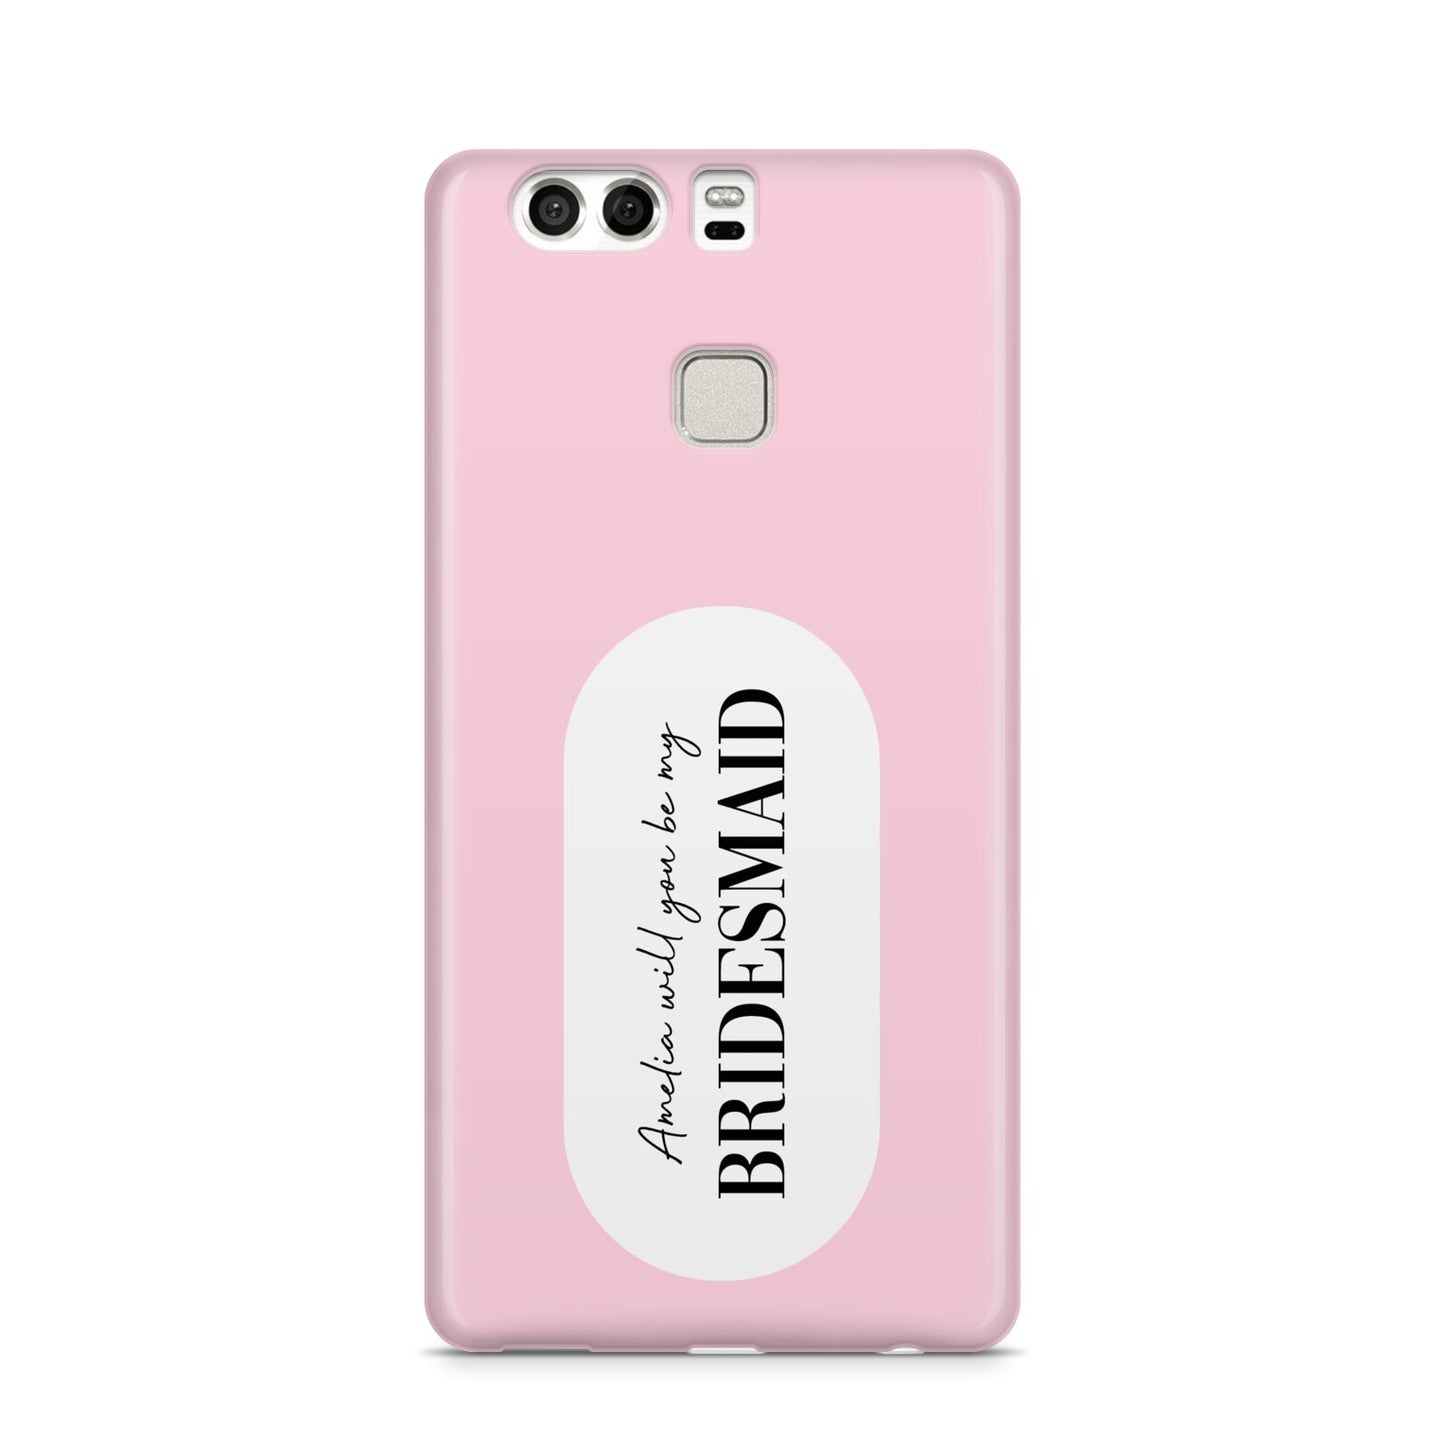 Will You Be My Bridesmaid Huawei P9 Case